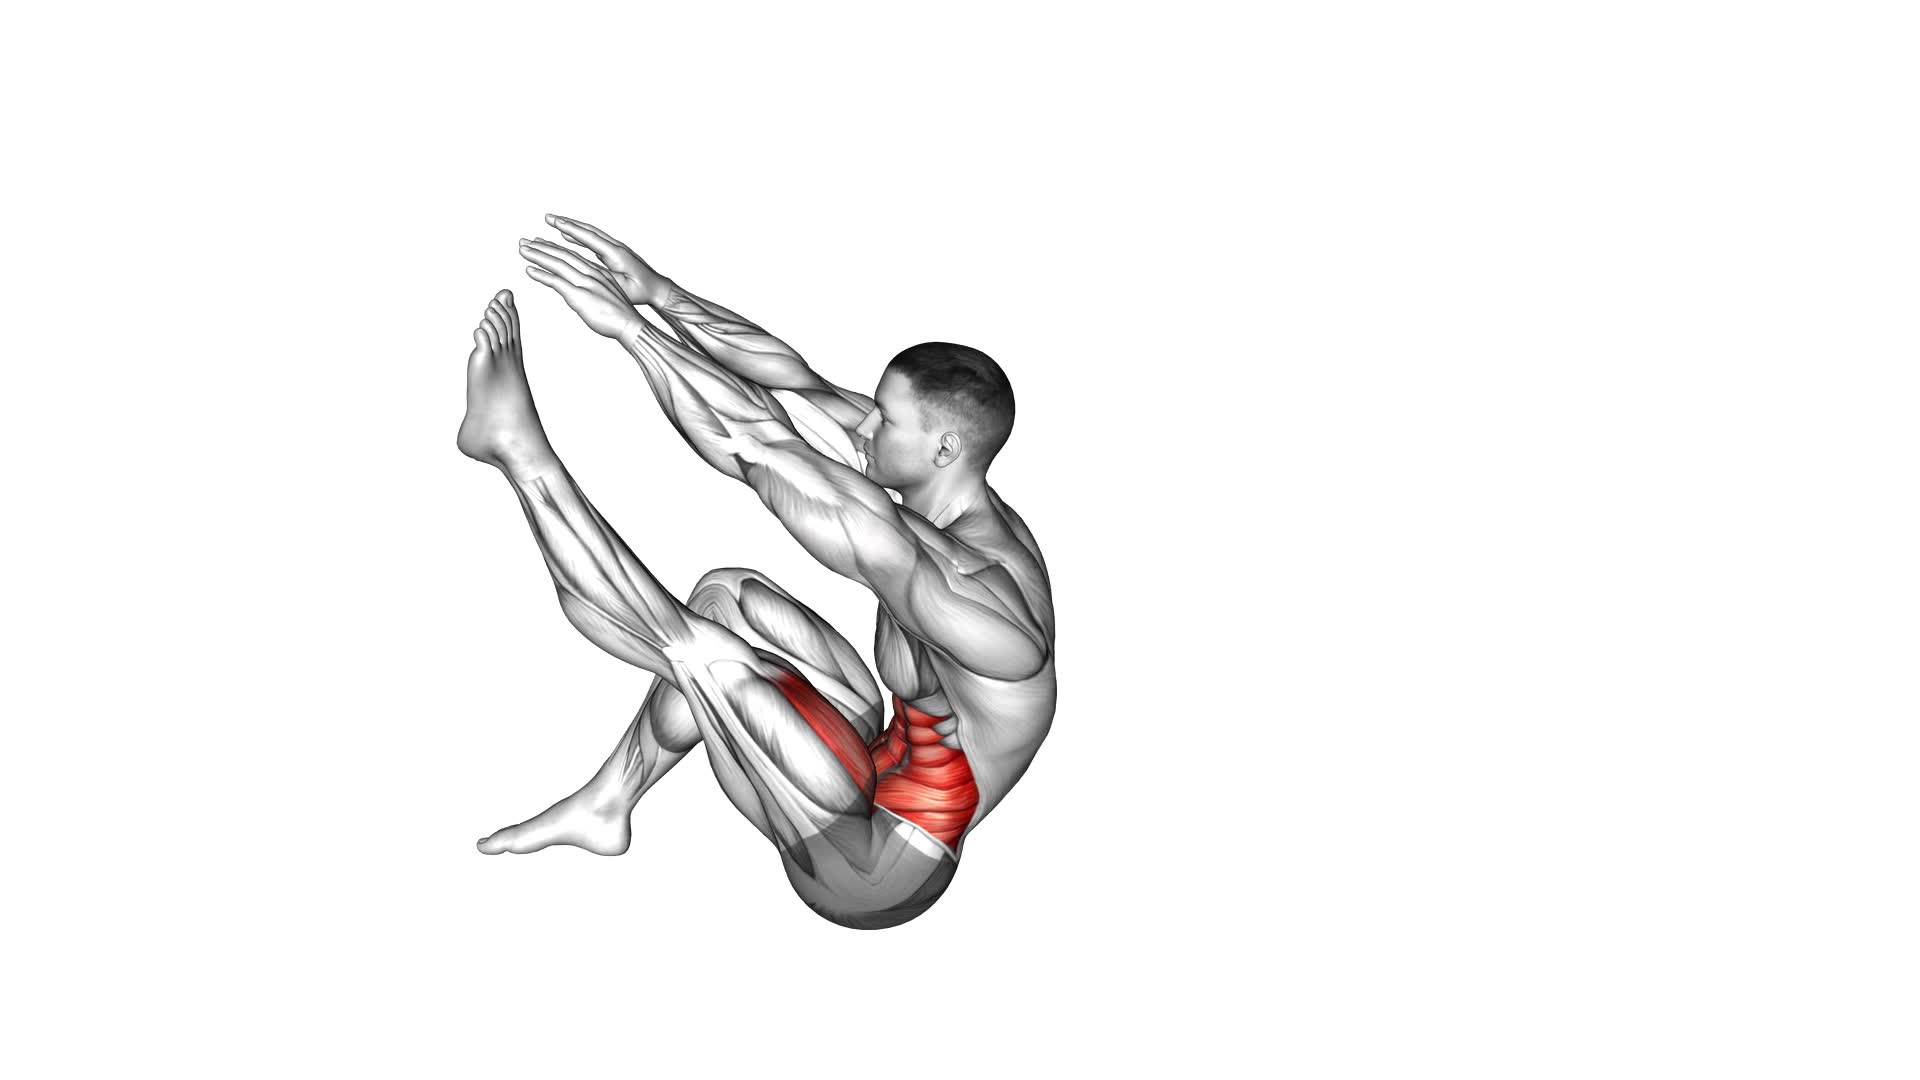 Flexion Leg Sit-Up (Straight Arm) - Video Exercise Guide & Tips